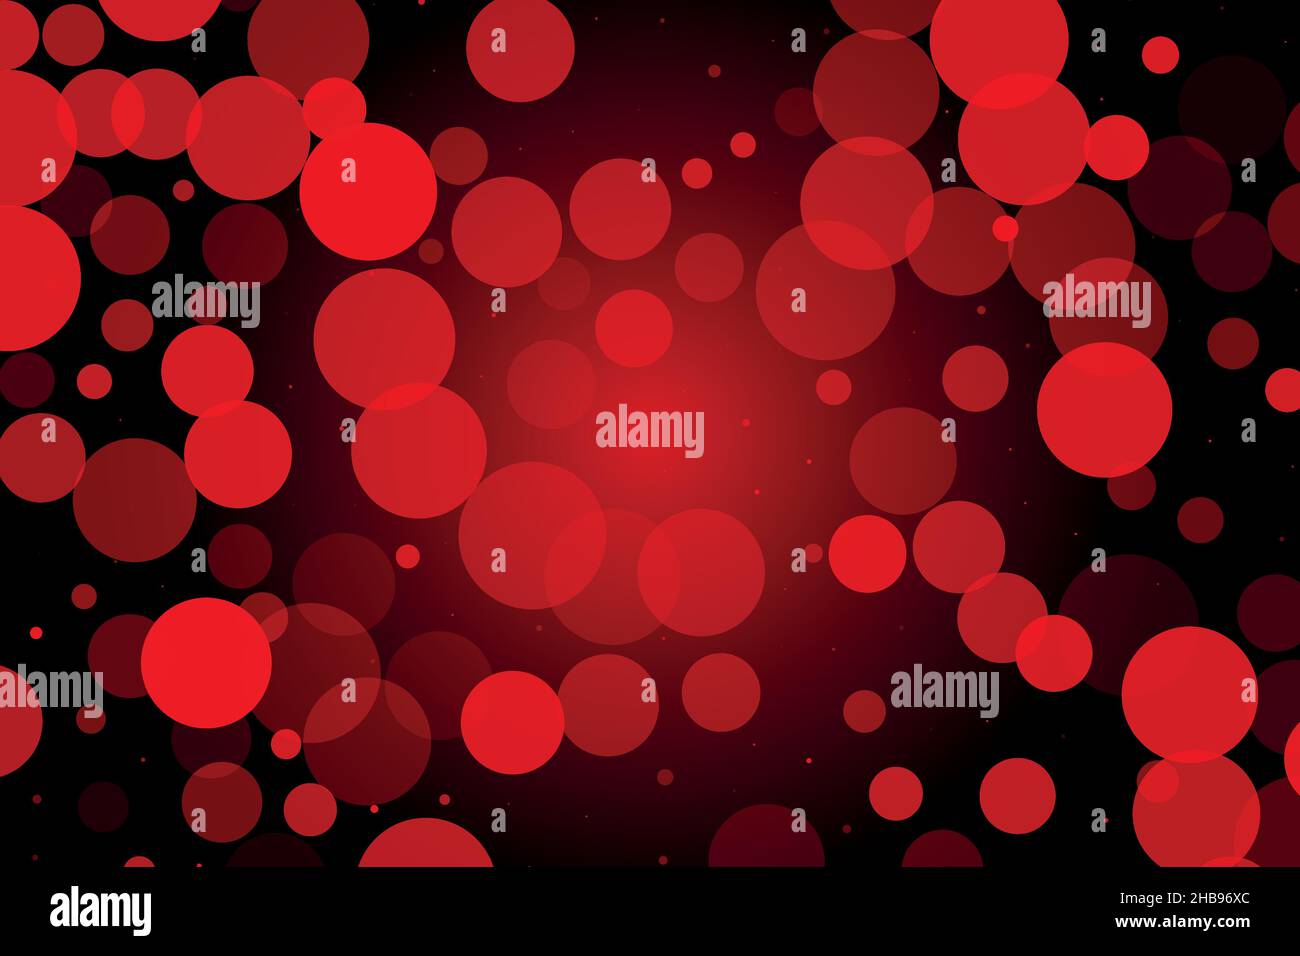 Red circles bokeh effect contrast background or backdrop vector illustration on black Stock Vector